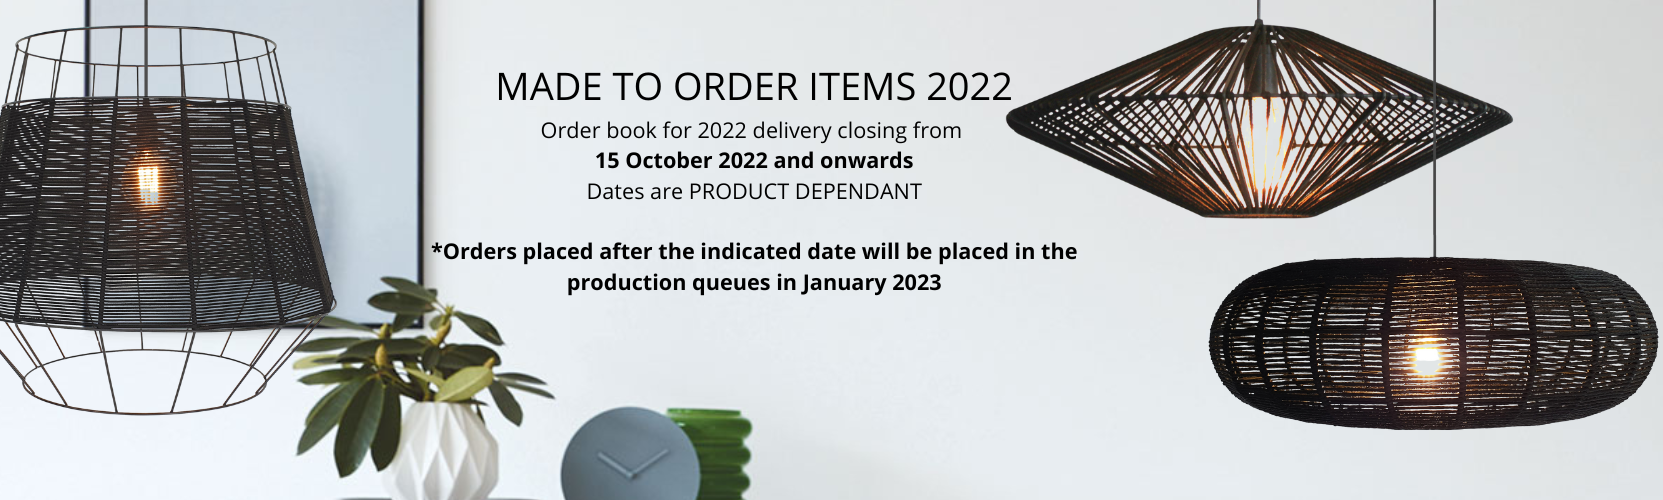 Made To Order Items For 2022 Delivery Closure Dates